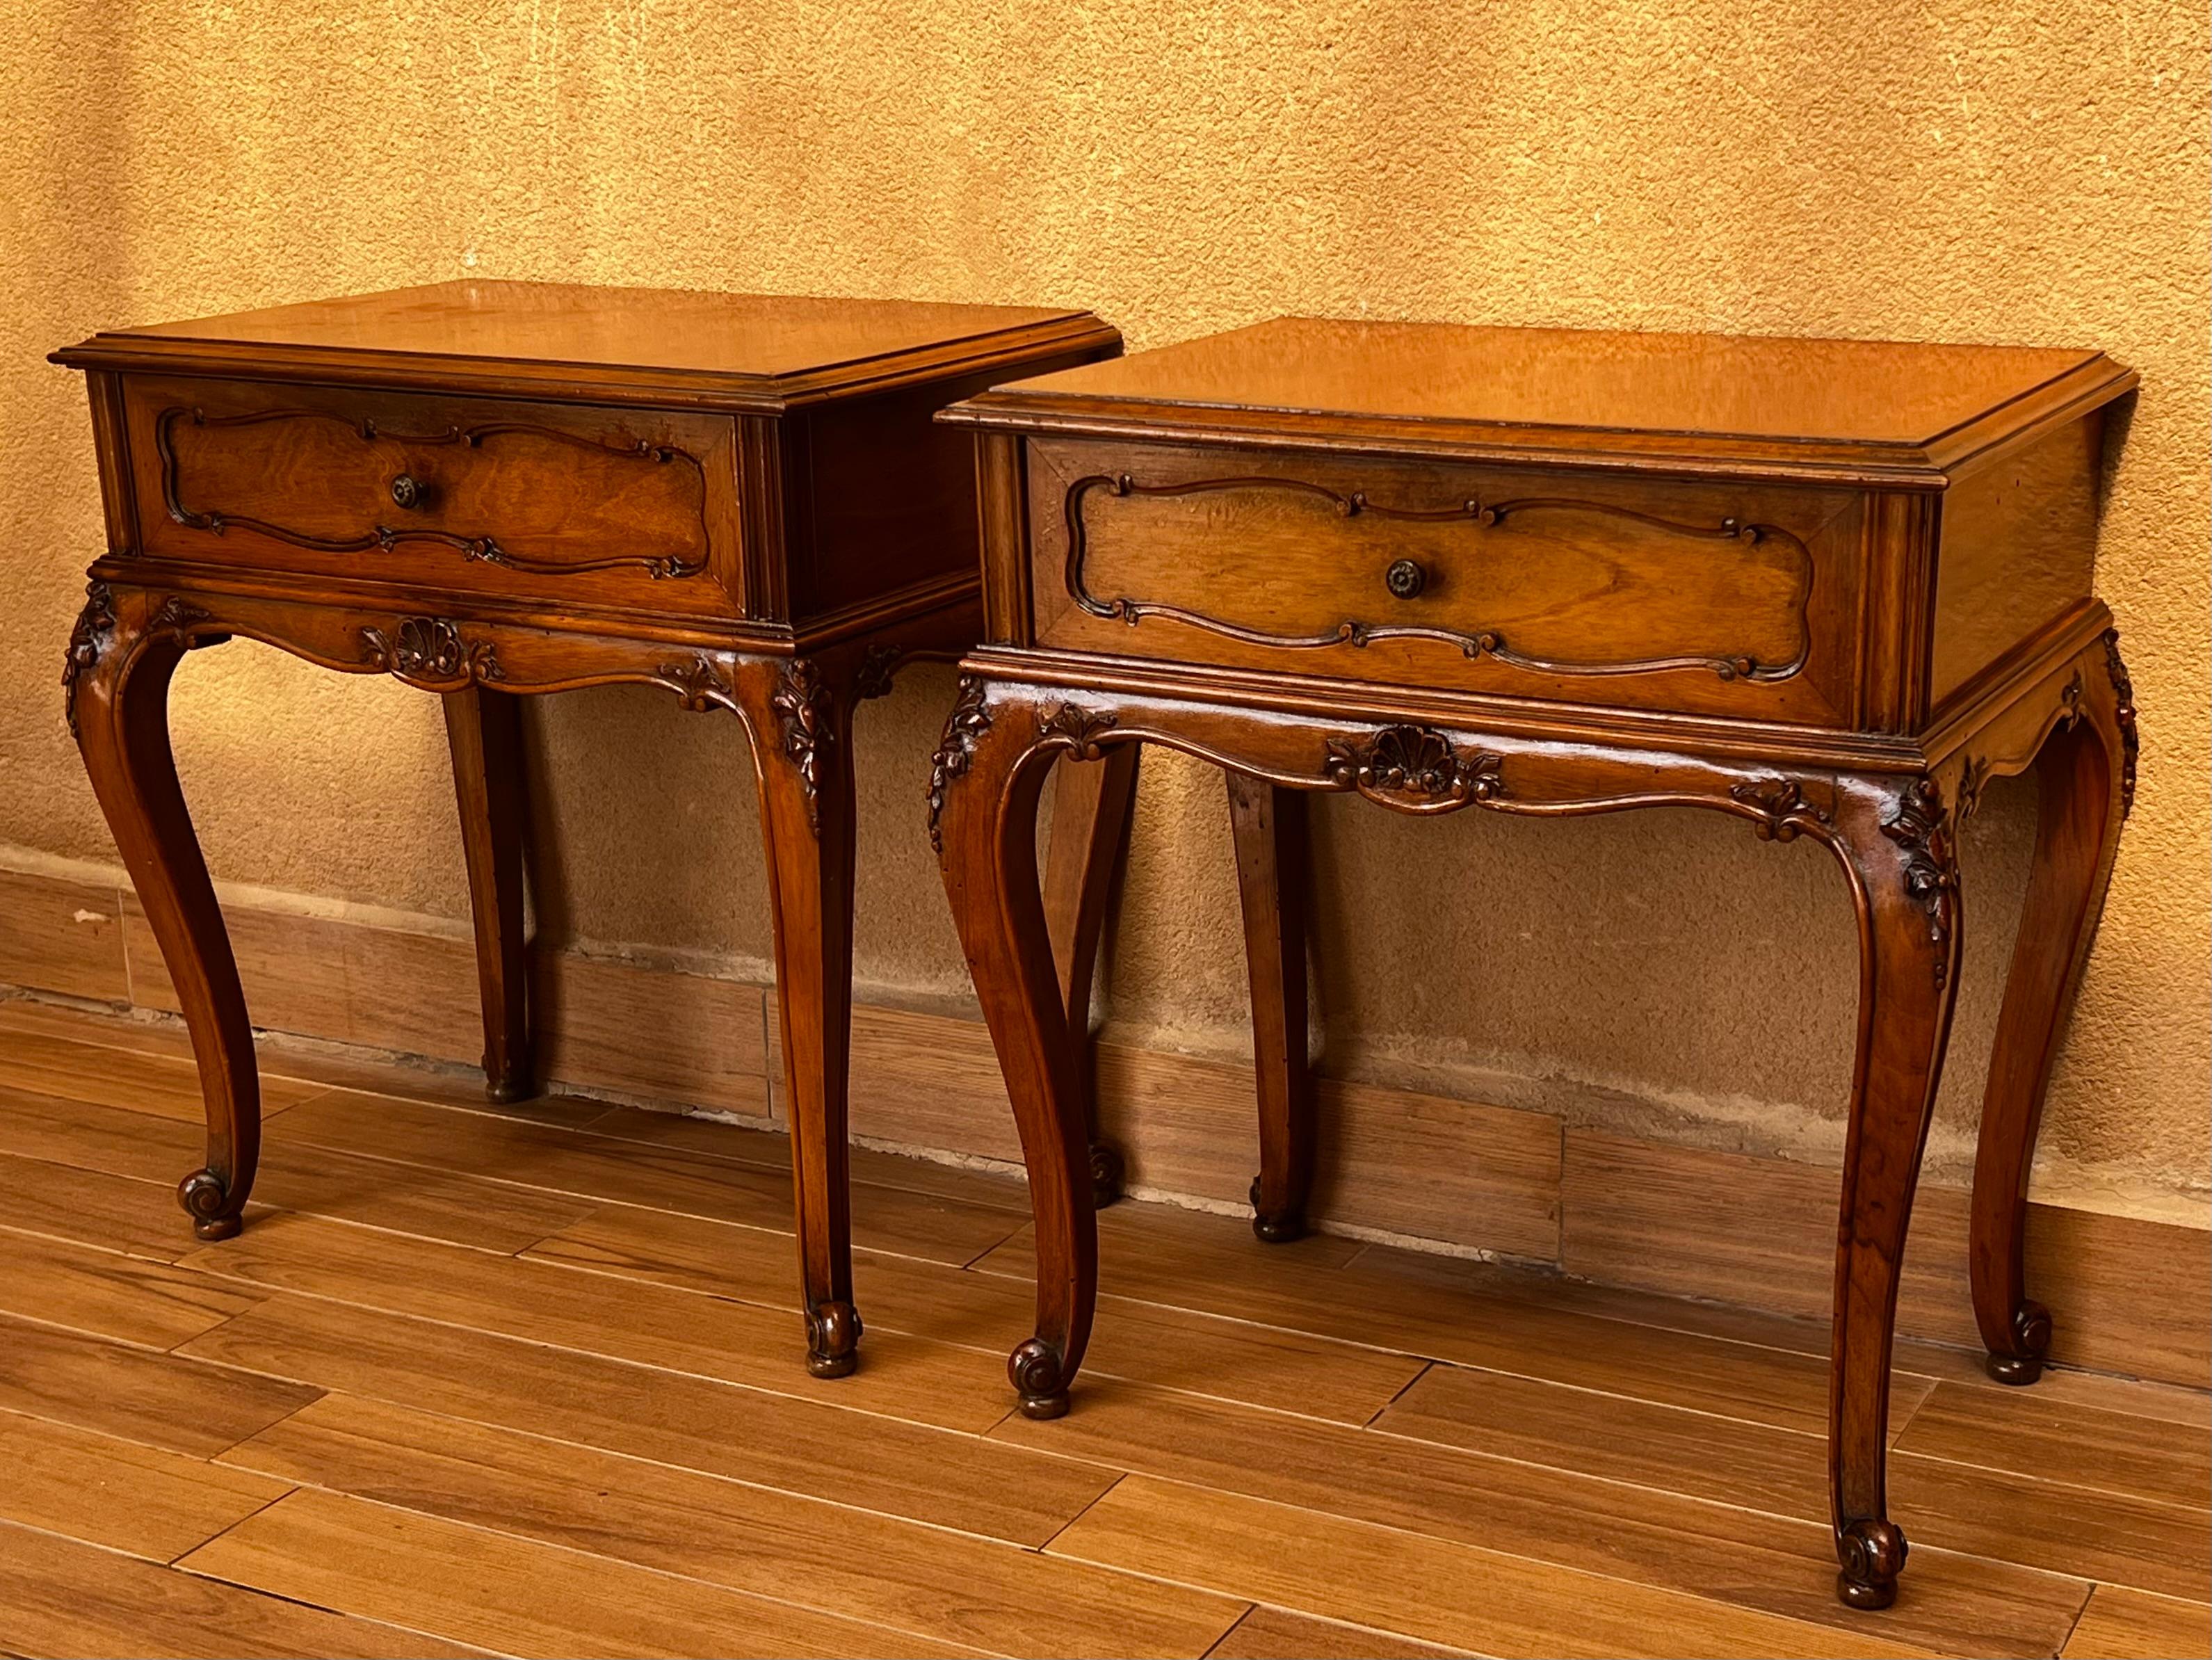 French Provincial 20th Century Pair of French Nightstands with One-Drawer and Cabriole Legs For Sale